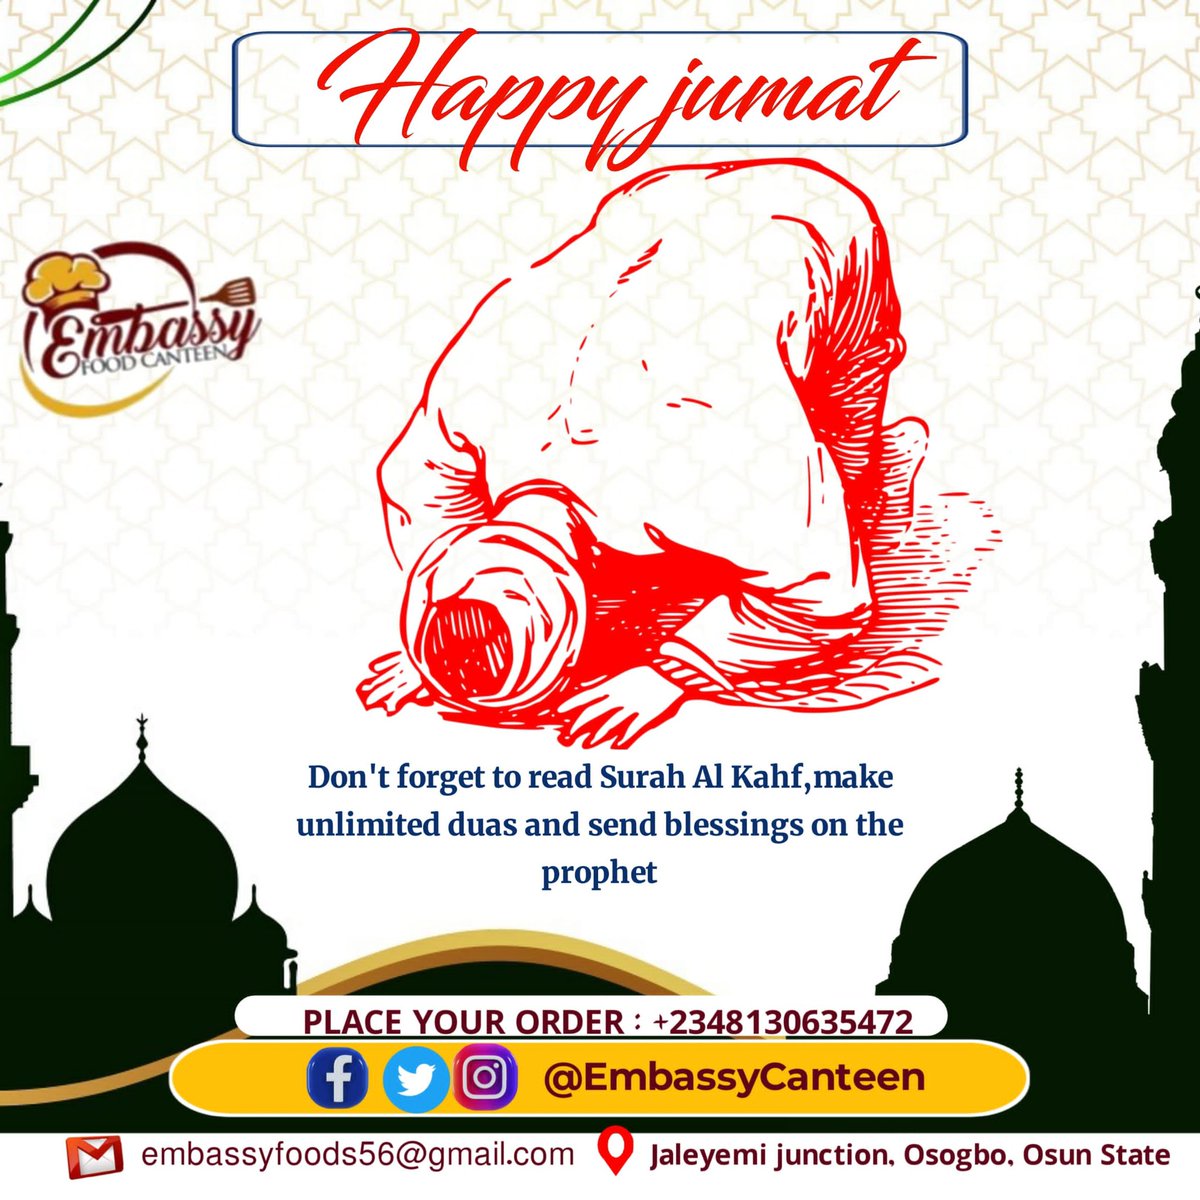 As we observe Jumma, may our hearts be at peace and our worries eased by Allah's grace.

#EmbassyFoodCanteen